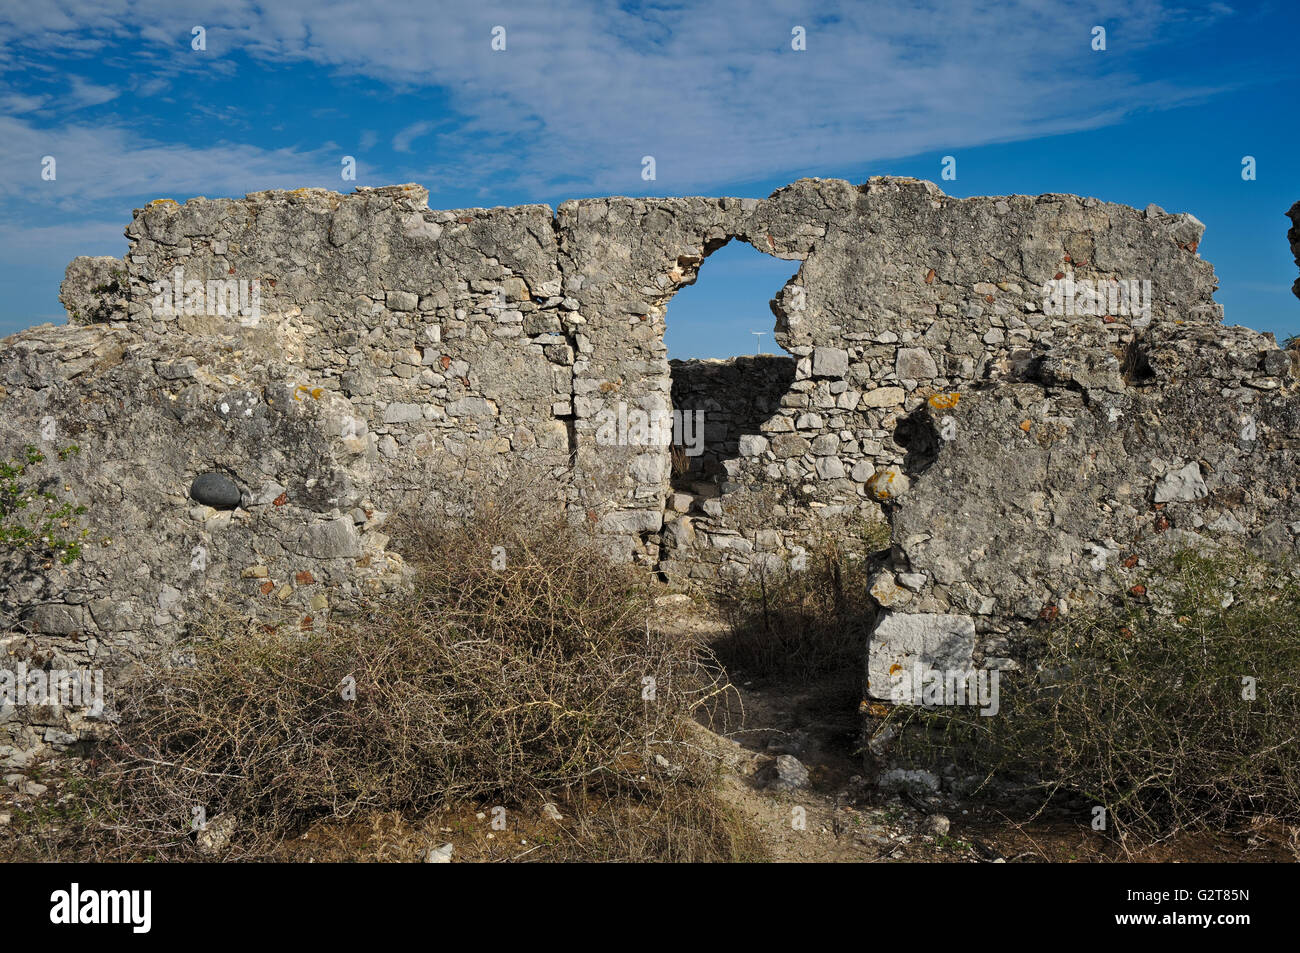 View of the historical ruins of Forte do Rato in Tavira. Travel and vacation destinations. Stock Photo